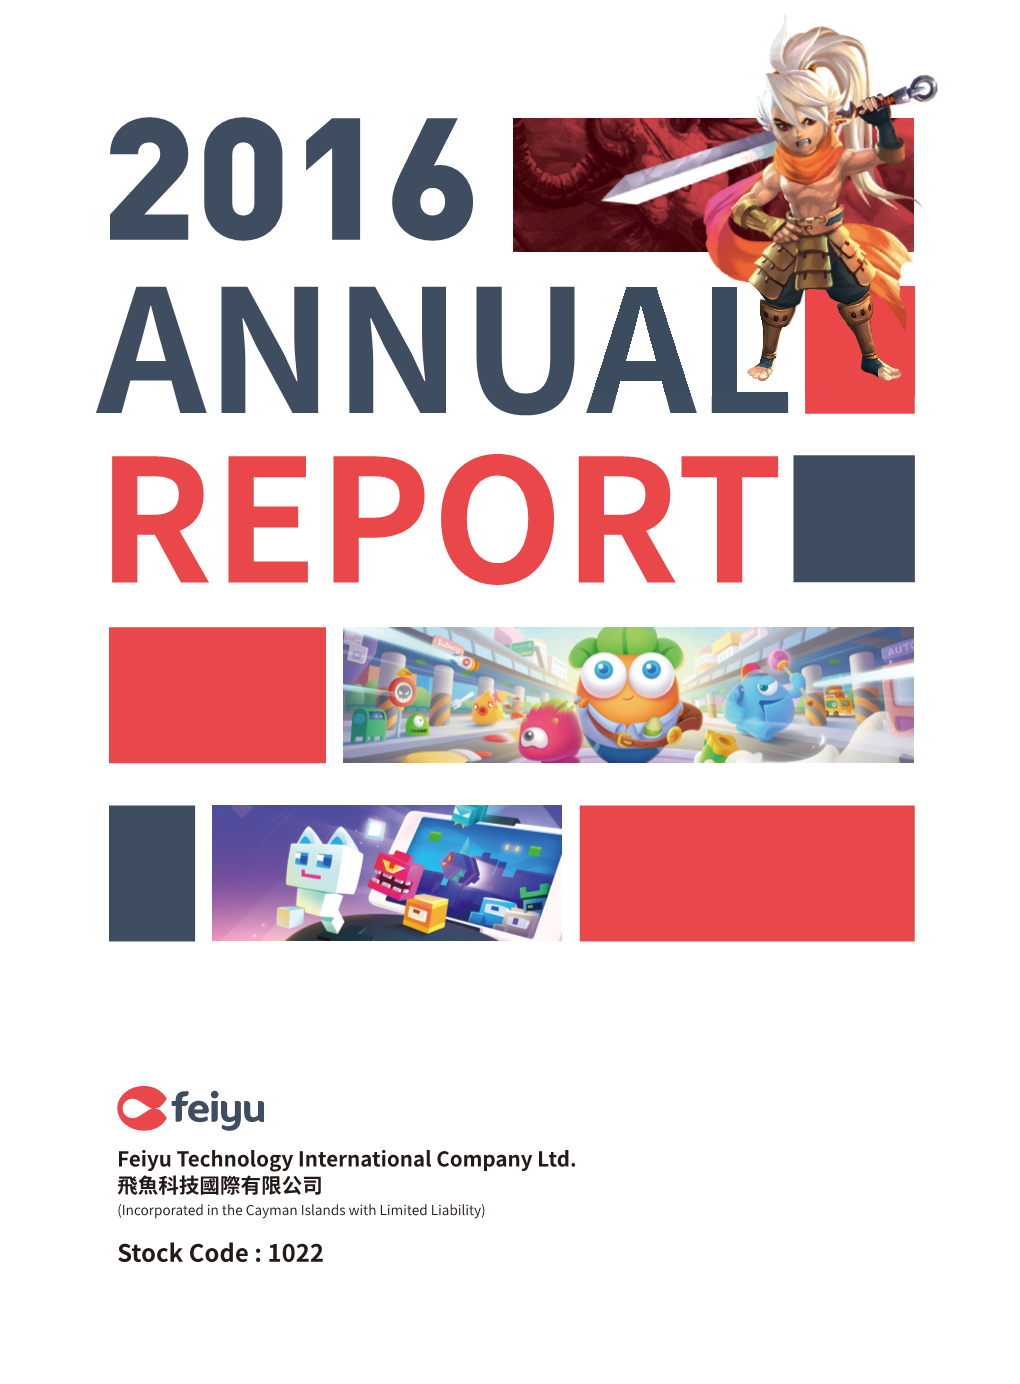 Annual Report of the Group for the Year Ended 31 December 2016